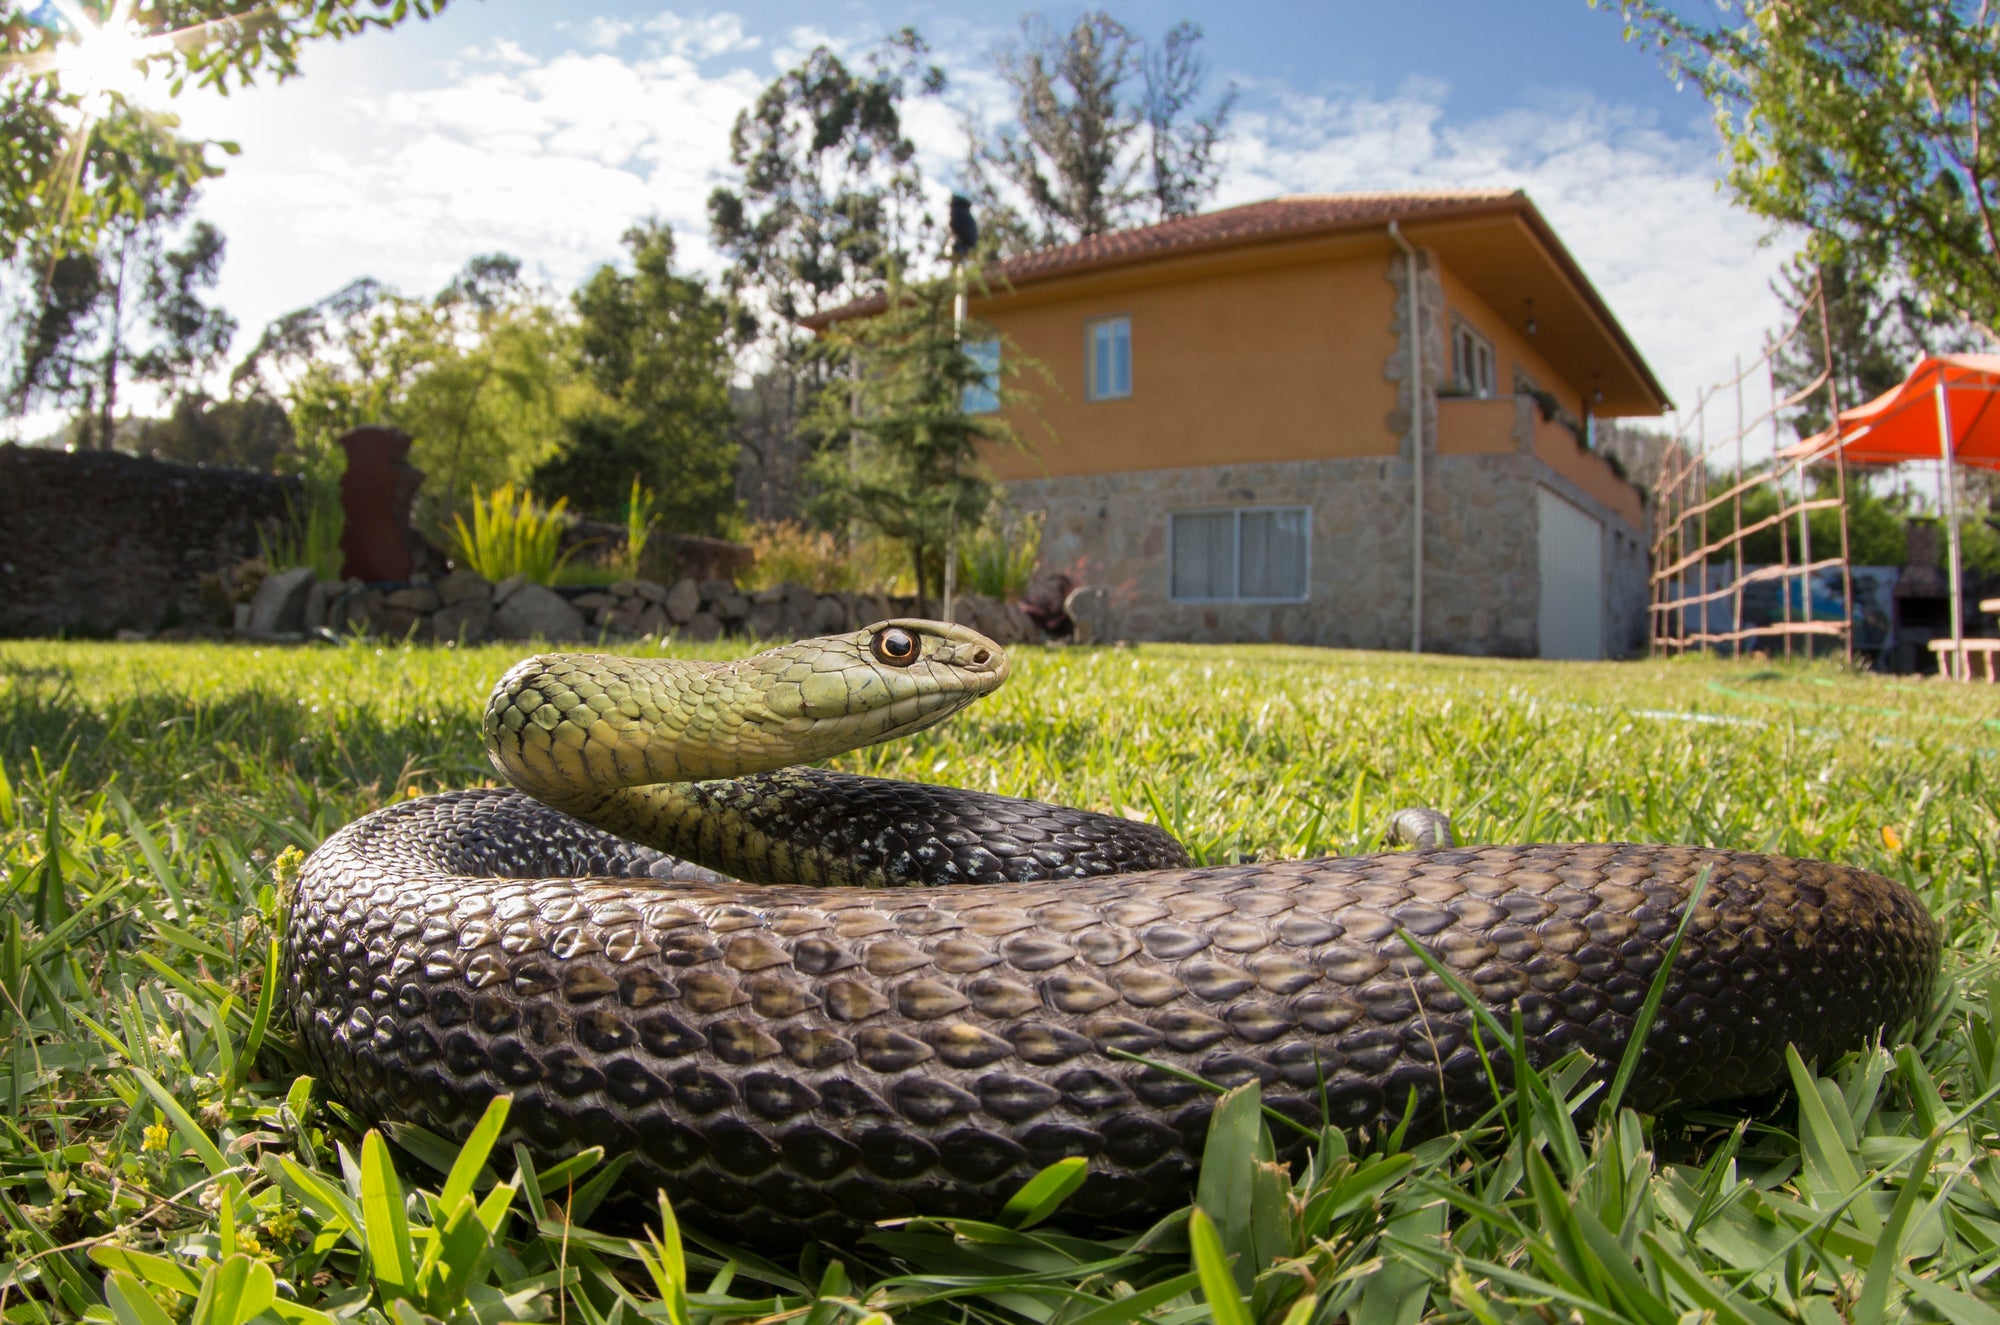 Get rid of snakes in the house